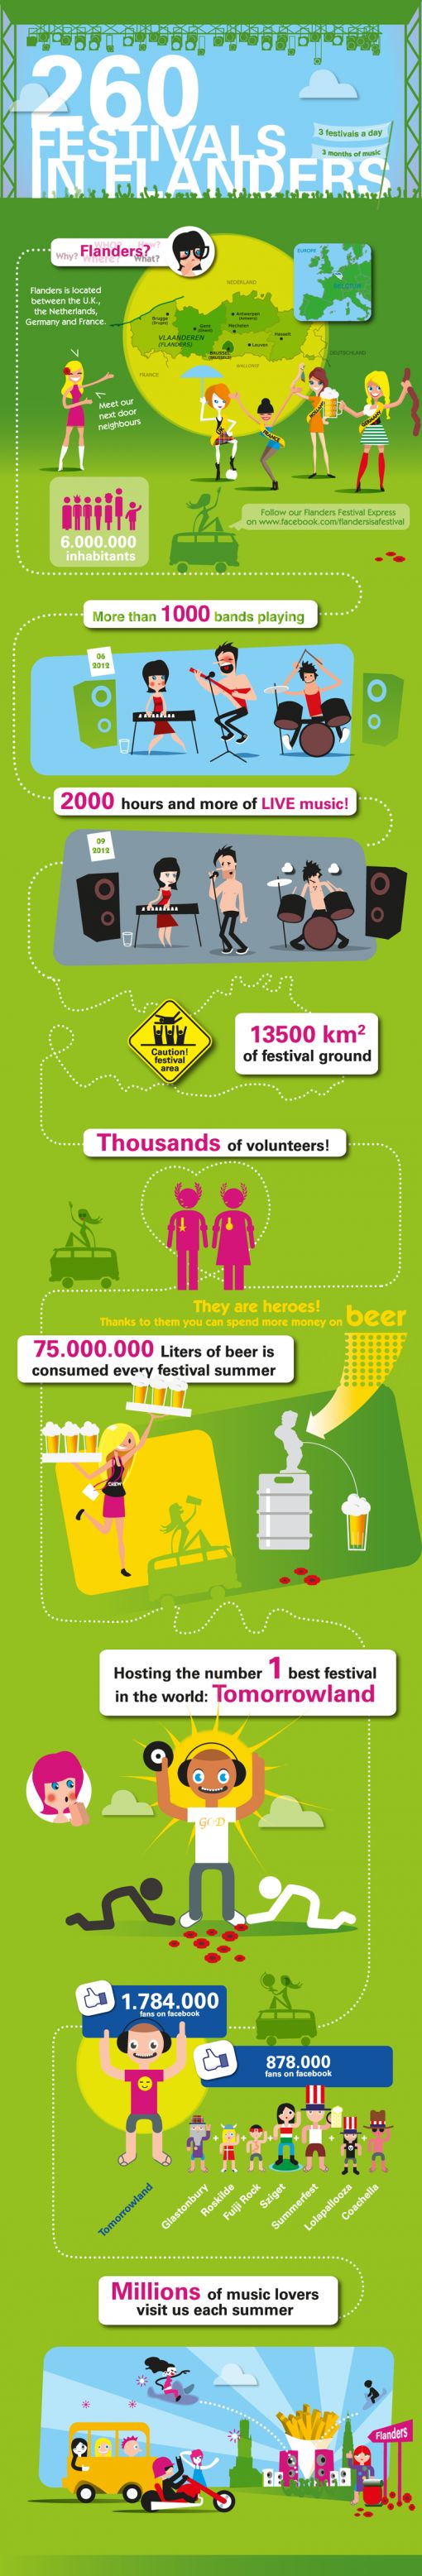 260-festivals-in-flanders-infographic